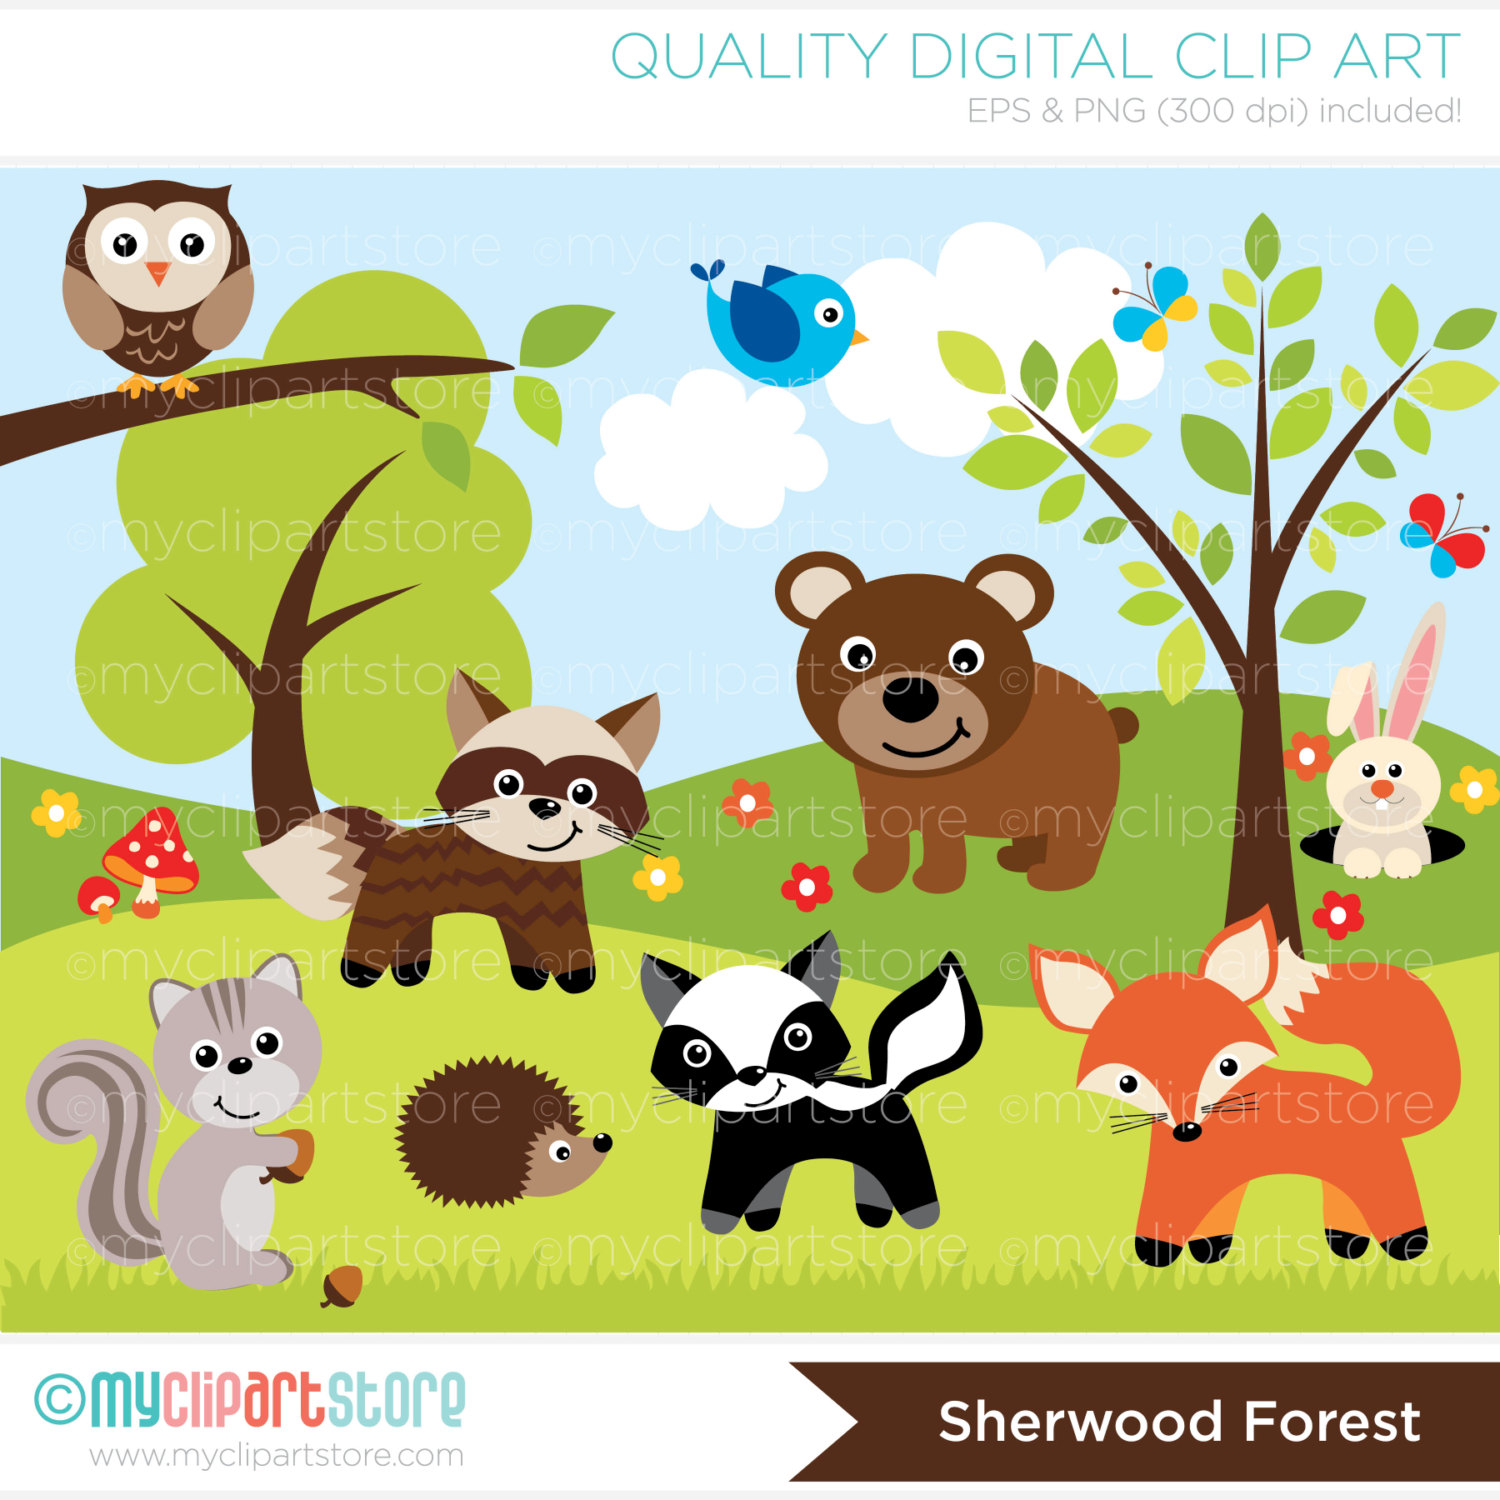 Woodland   Sheerwood Forest Animals Clip Art   By Myclipartstore